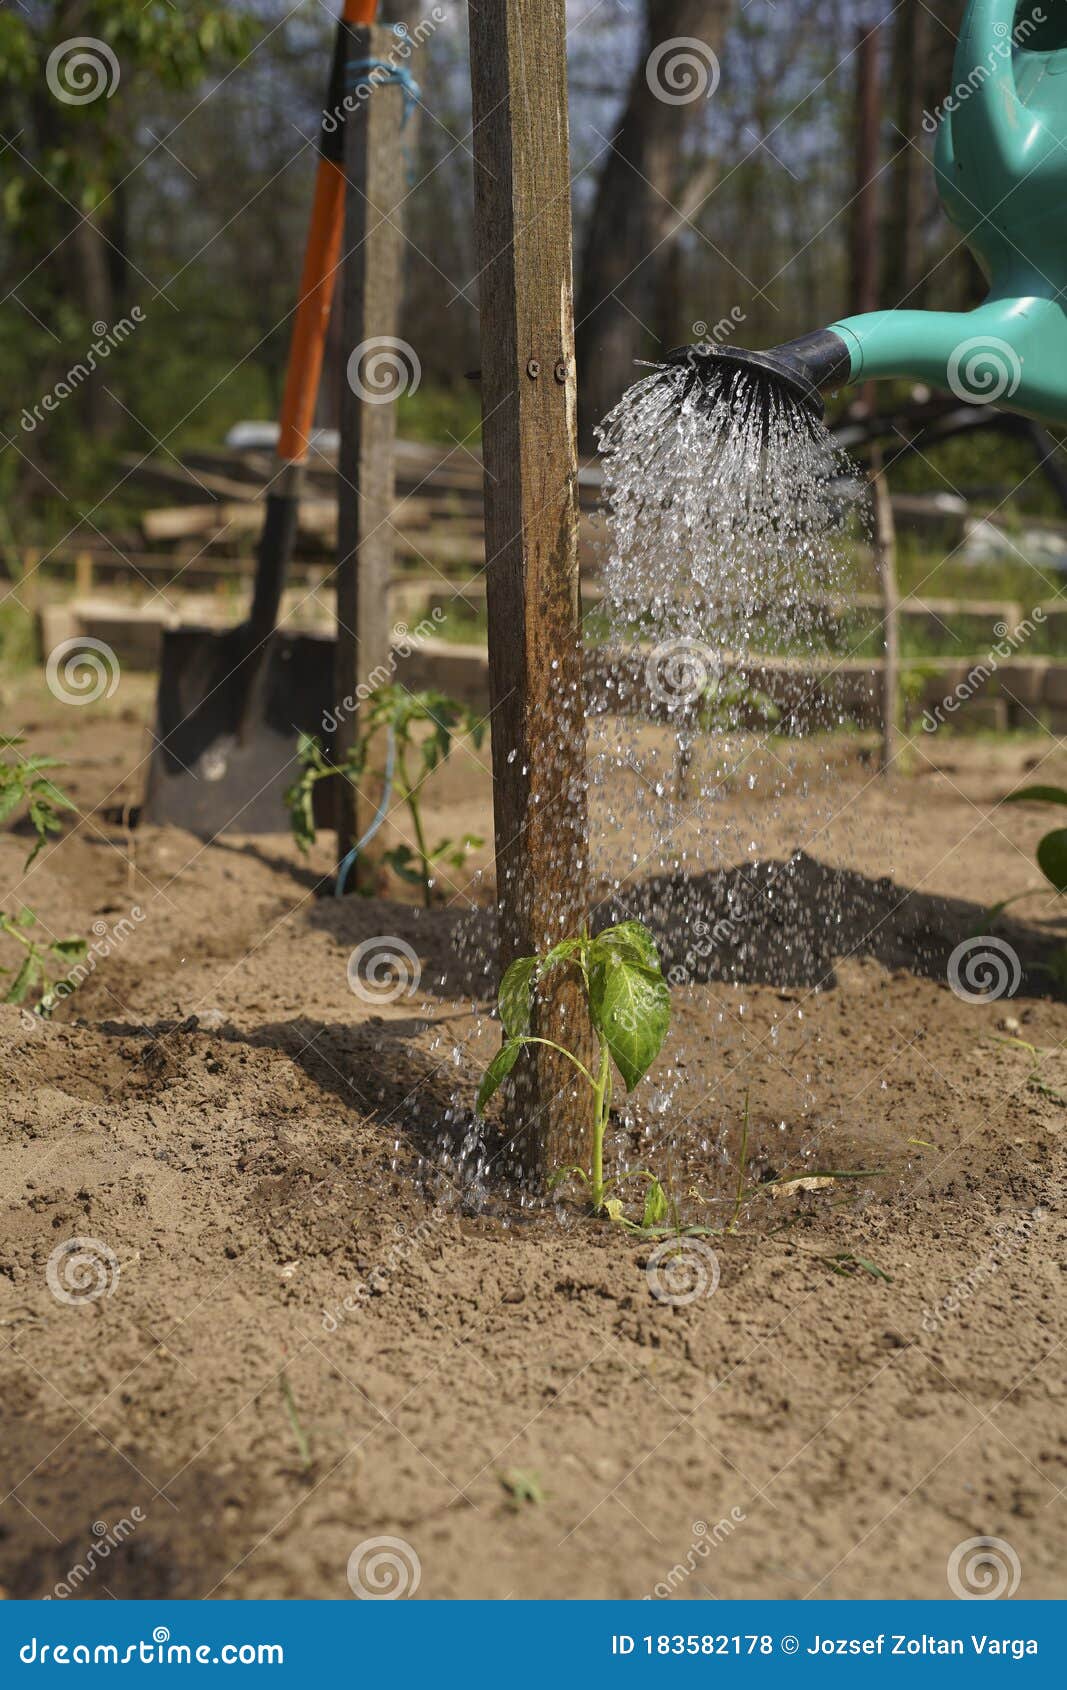 in the home kitchen garden, the farmer irrigates the pepper seedlings in the spring with a green watering can.